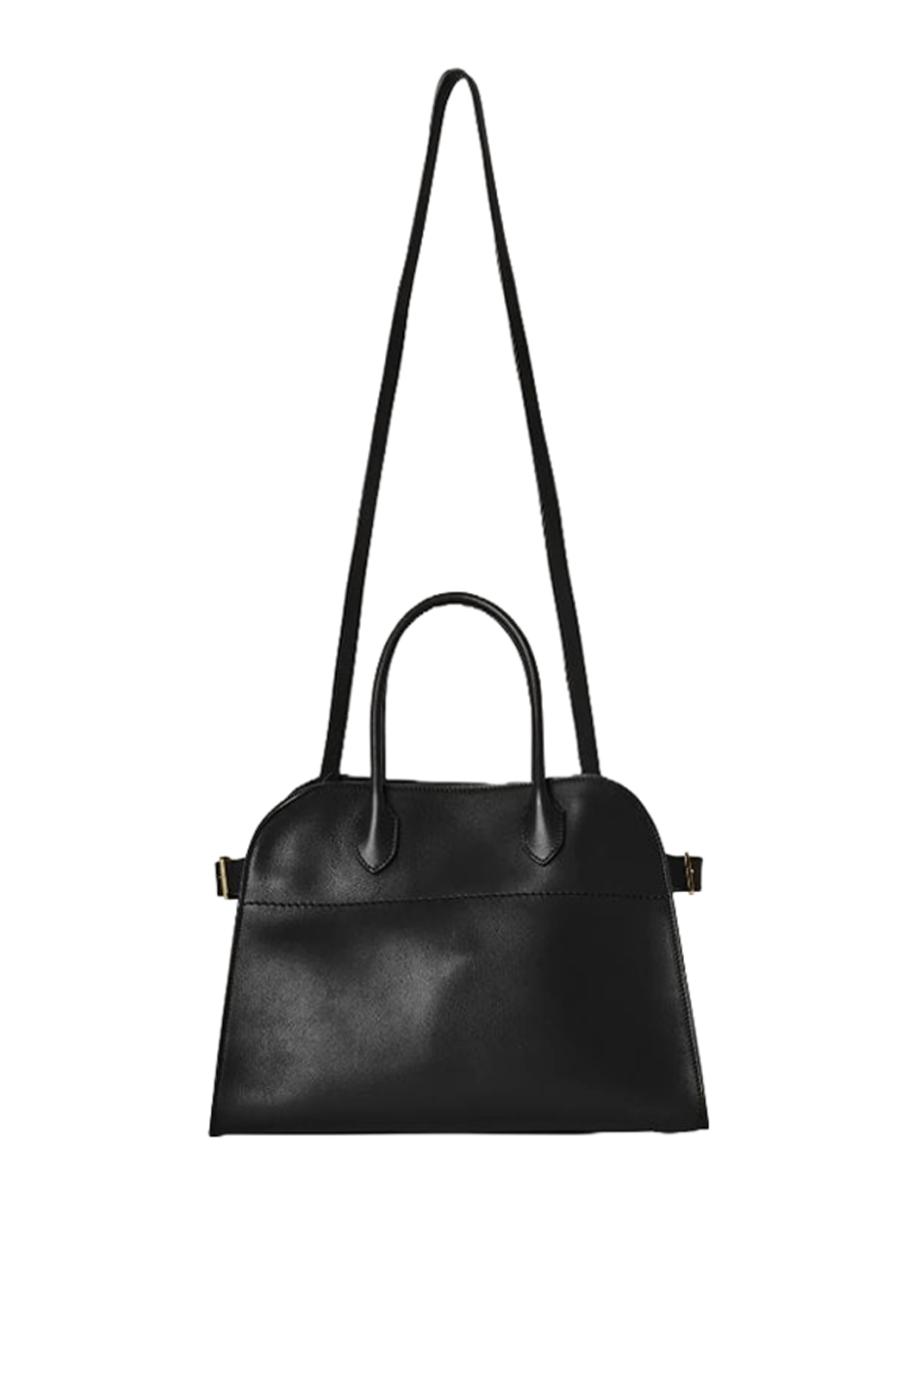 Margaux 12 leather tote 